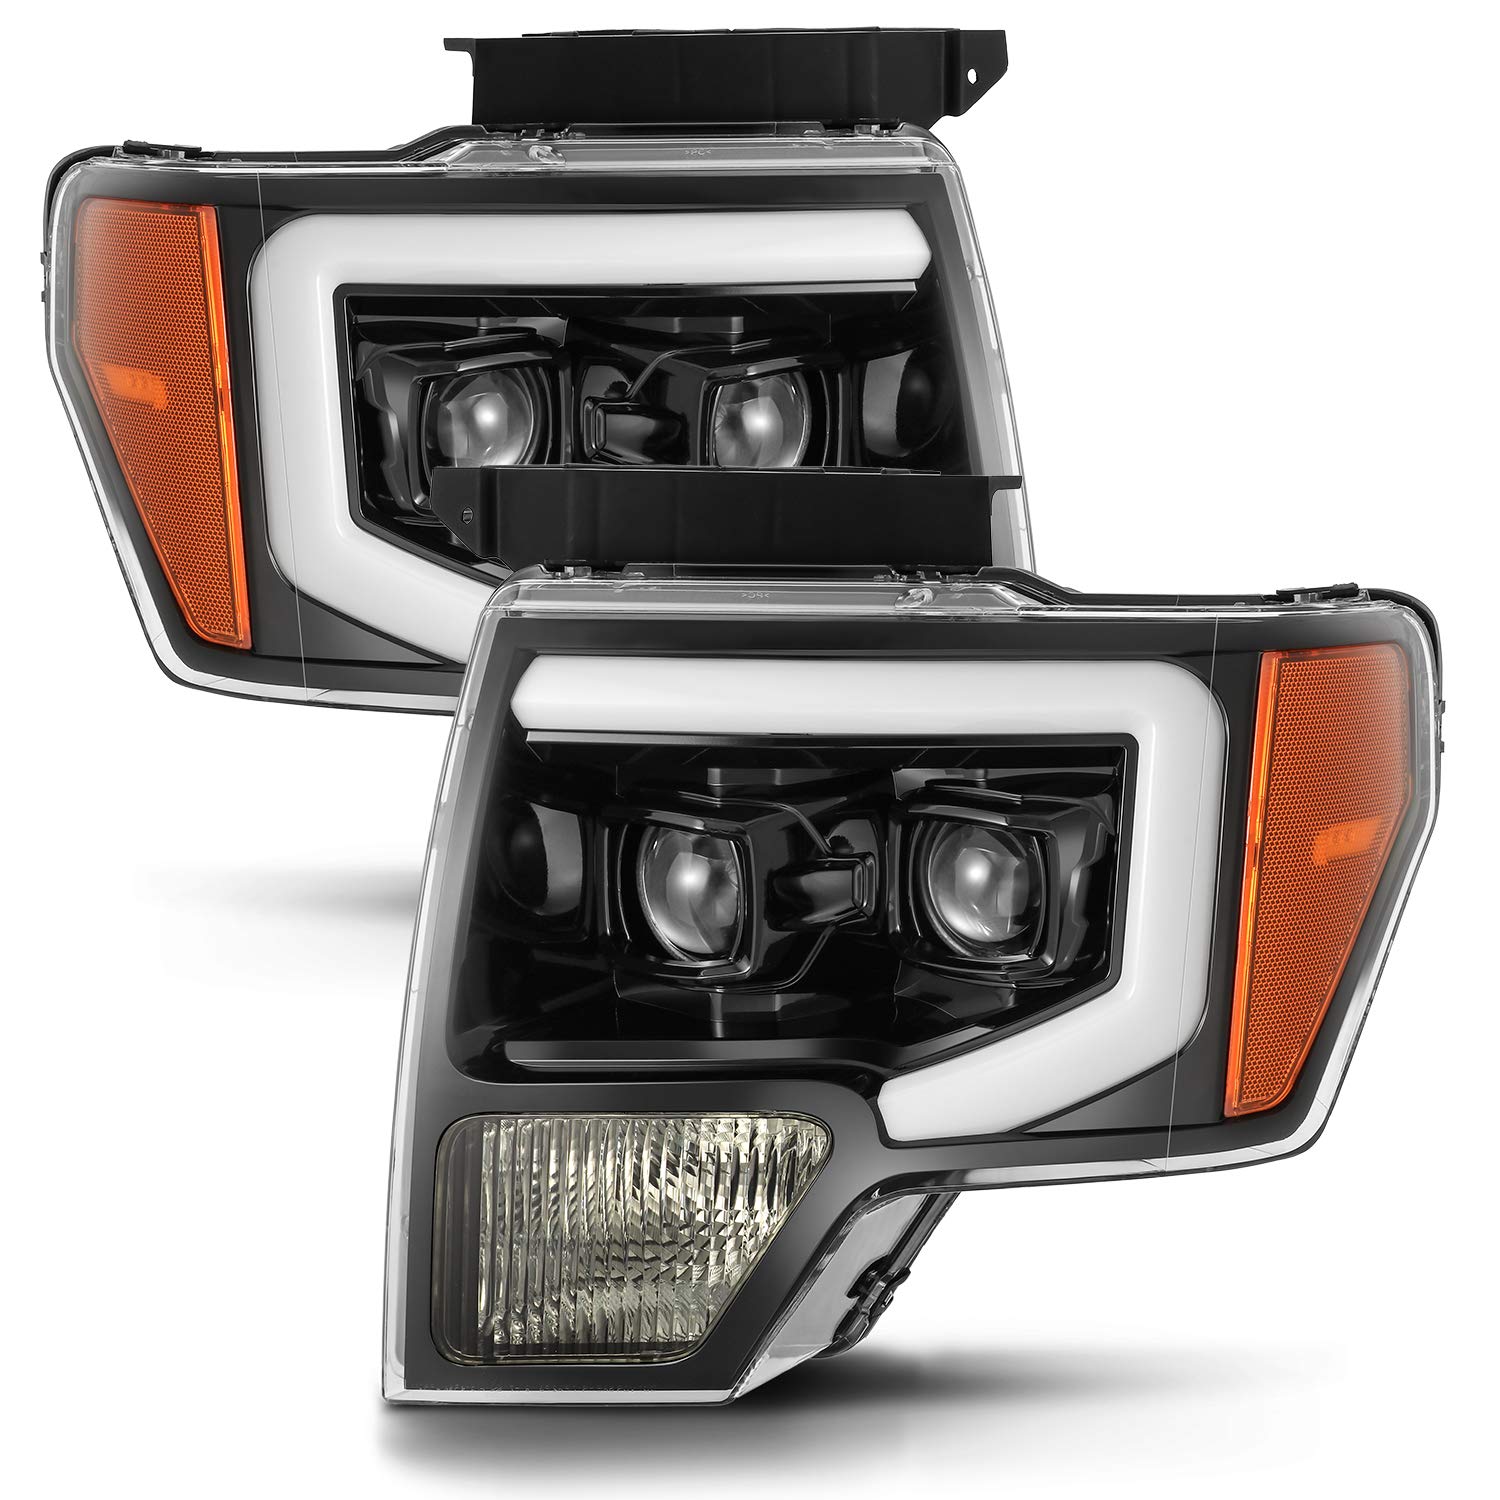 AlphaRex Base Model Jet Black with Smoke Lens For 09-14 Ford F150 DRL LED Tube Dual Projector Headlights